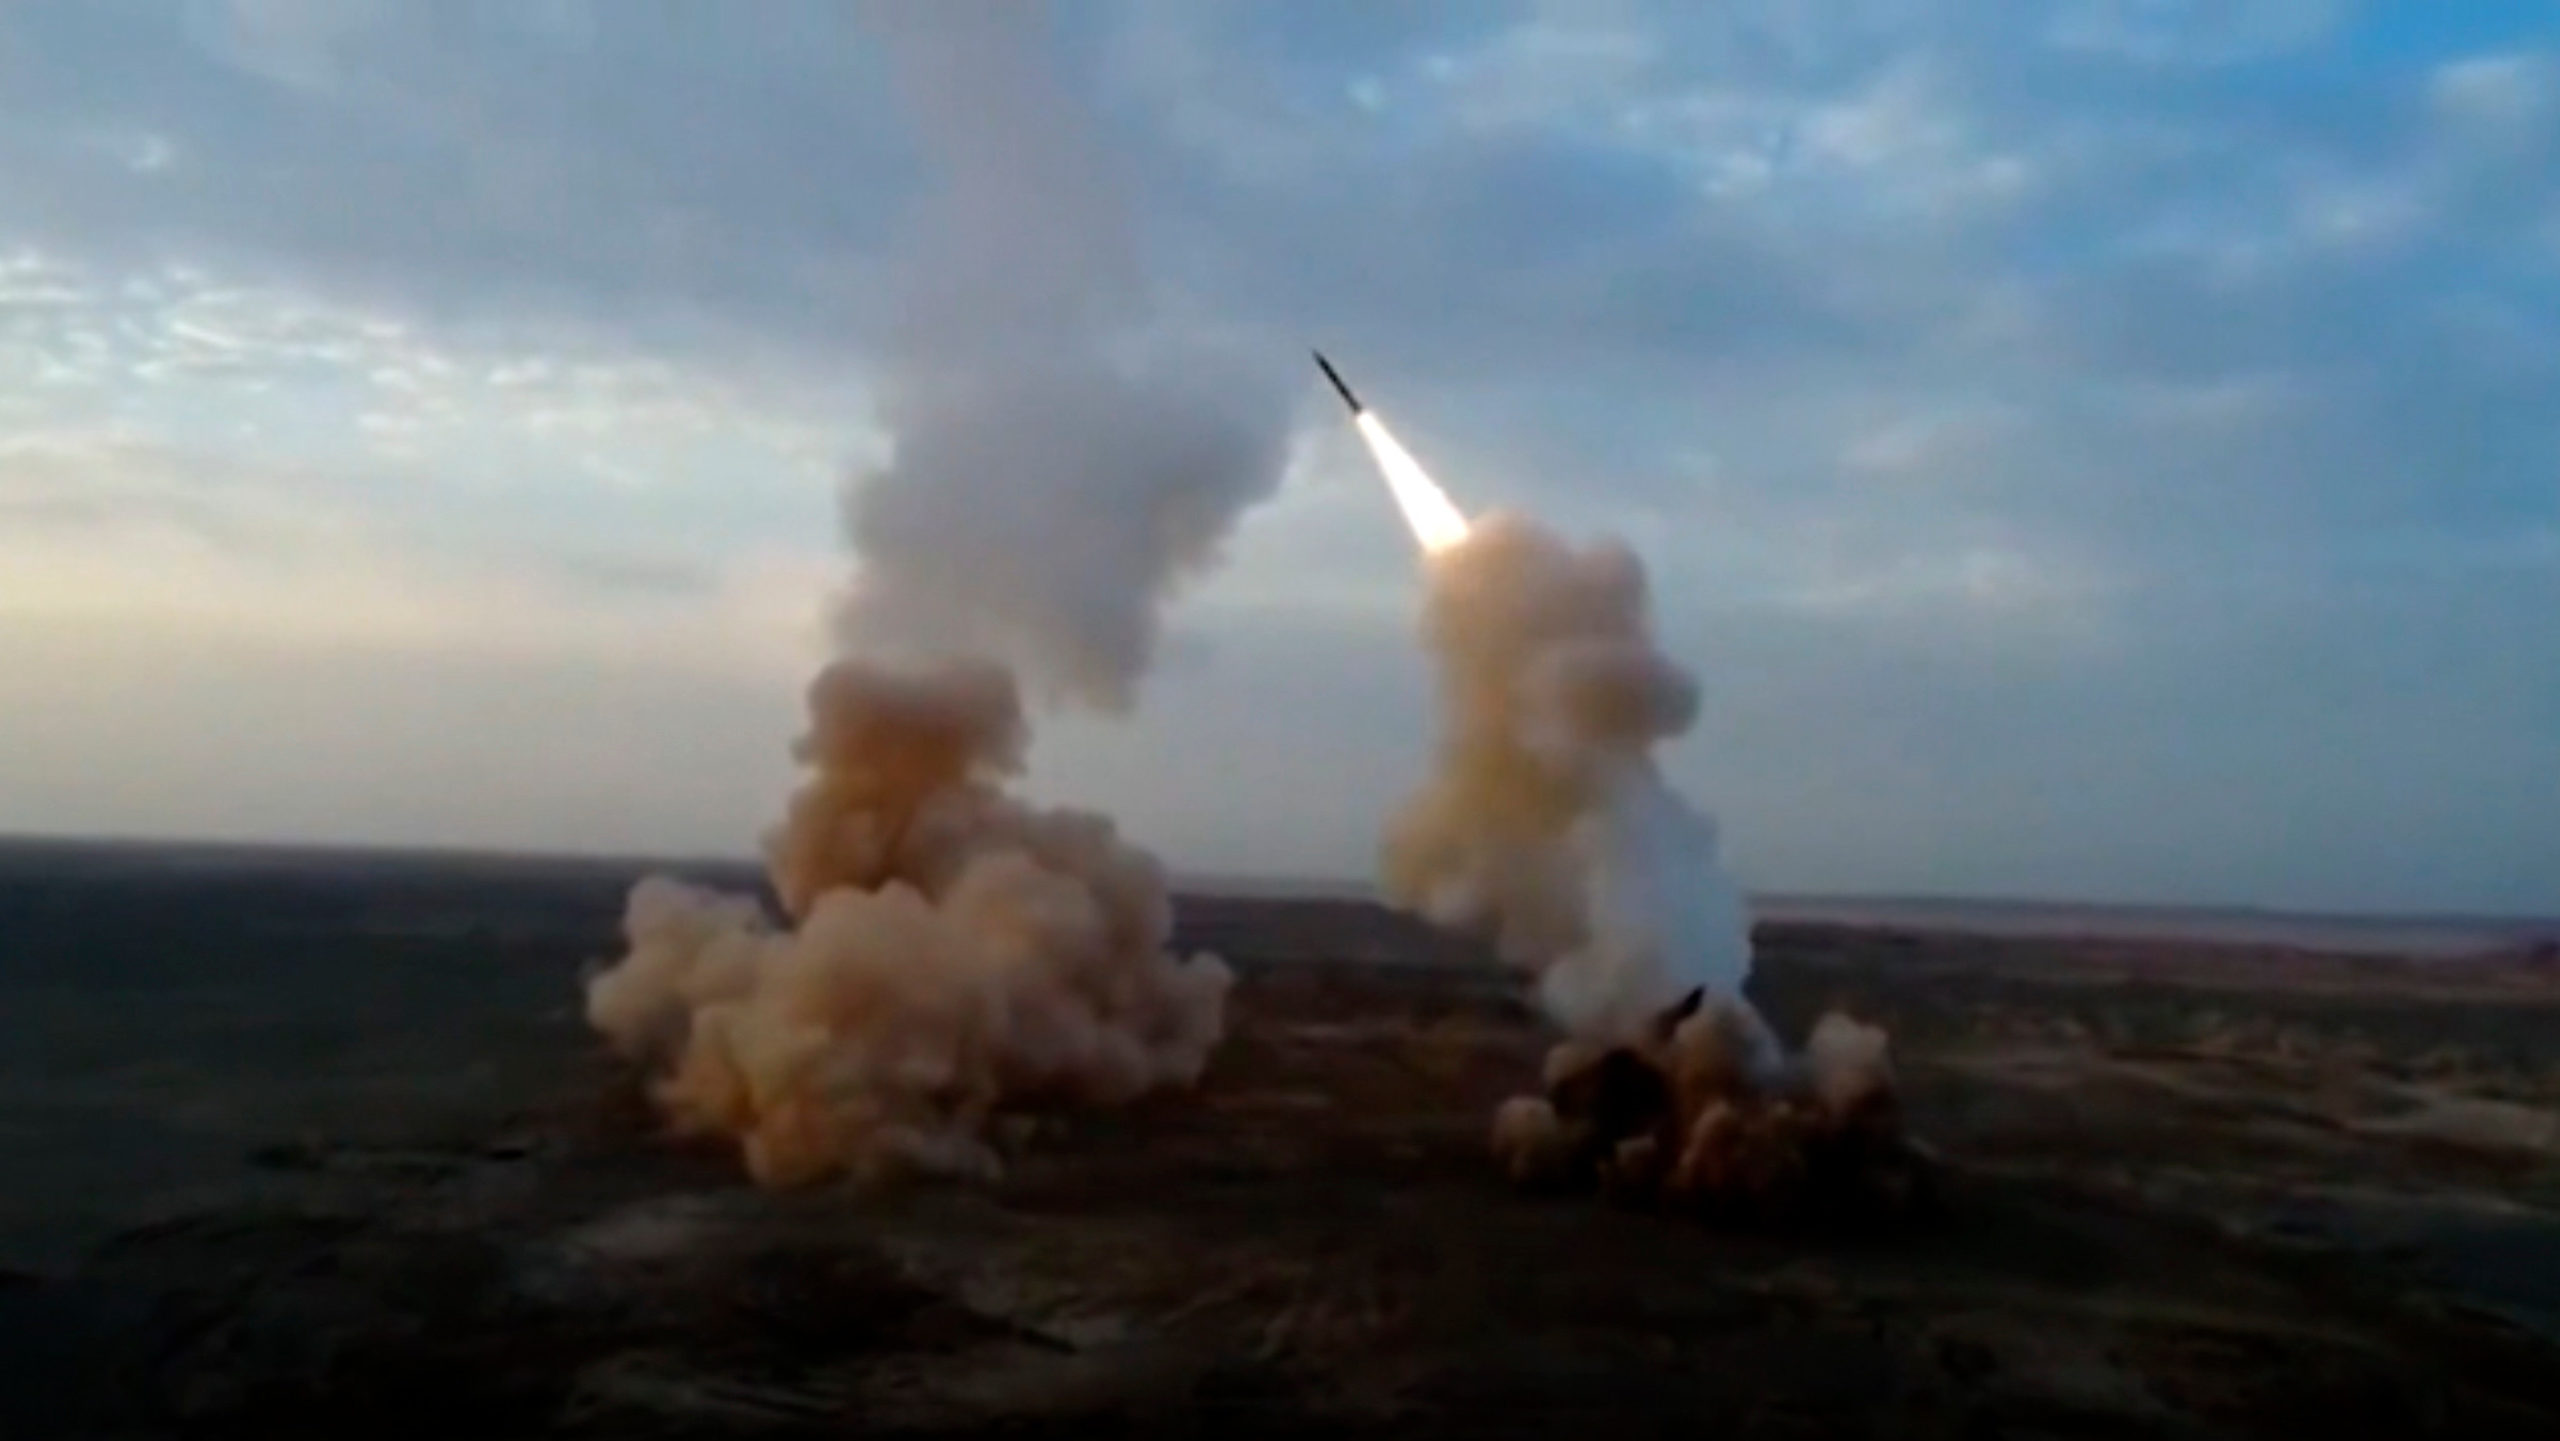 The IRGC firing ballistic missiles during a live-fire exercise in a photo released July 28, 2020. This photo was released by the IRGC and cannot be independently verified. (Photo: IRGC, AP)